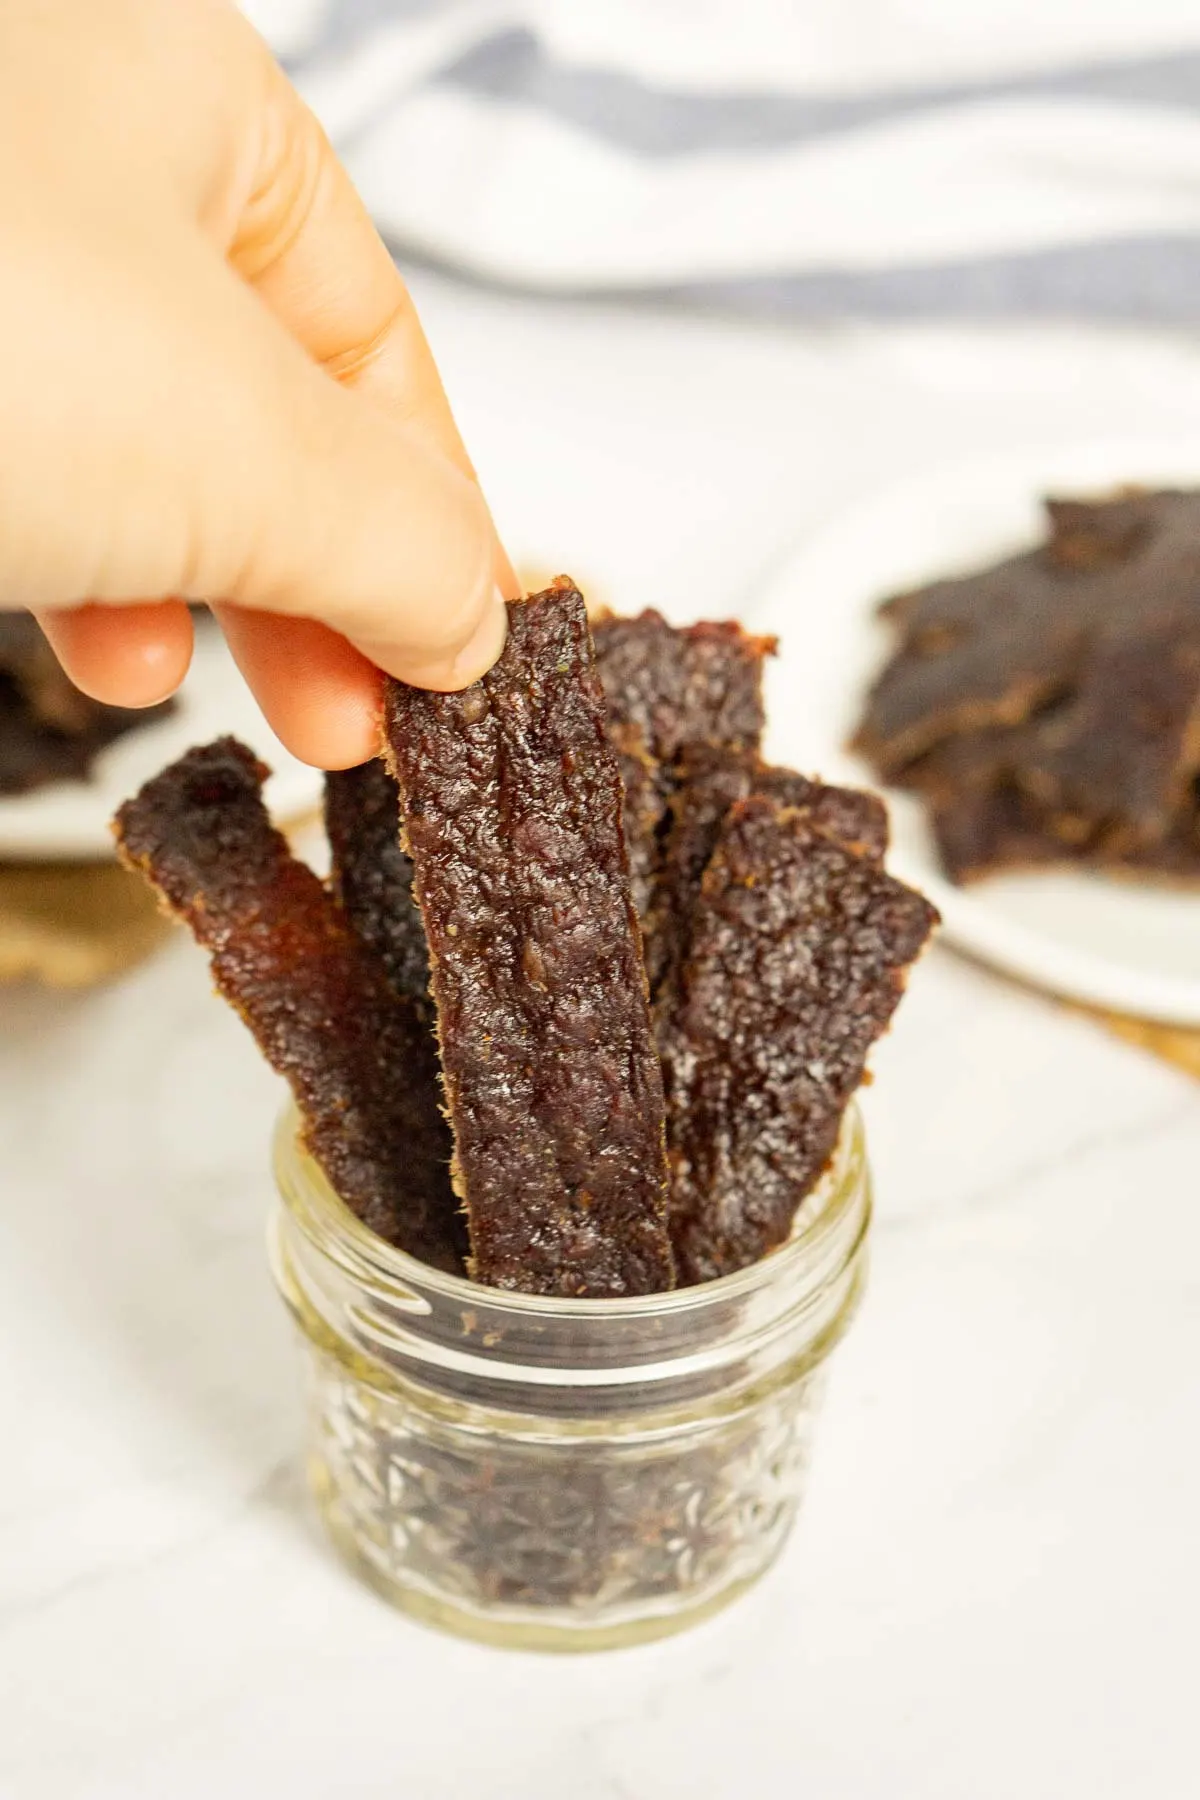 Hand grabbing a piece of sweet and spicy ground jerky